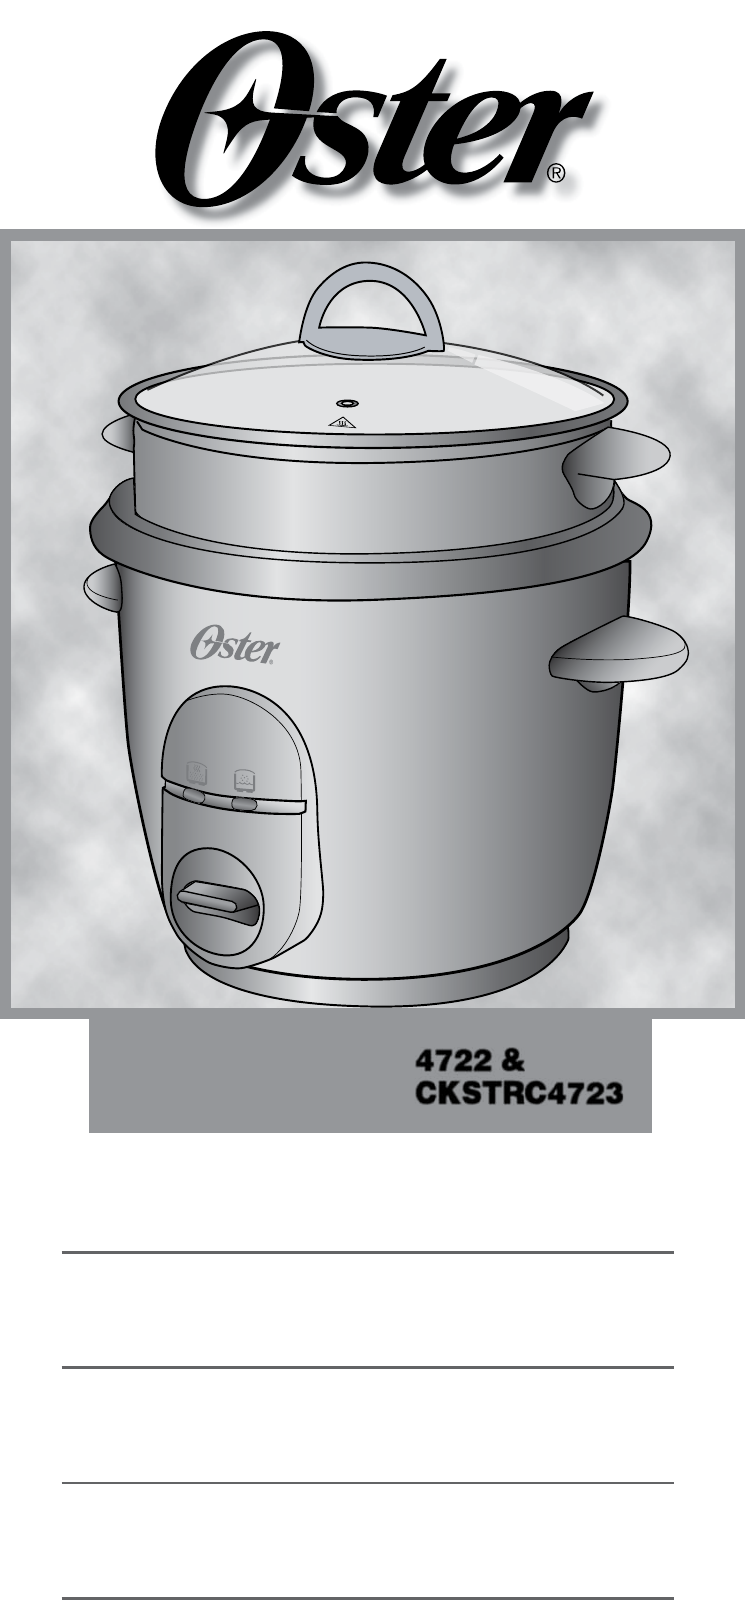 Oster 4722 Rice Cooker Instruction manual PDF View/Download